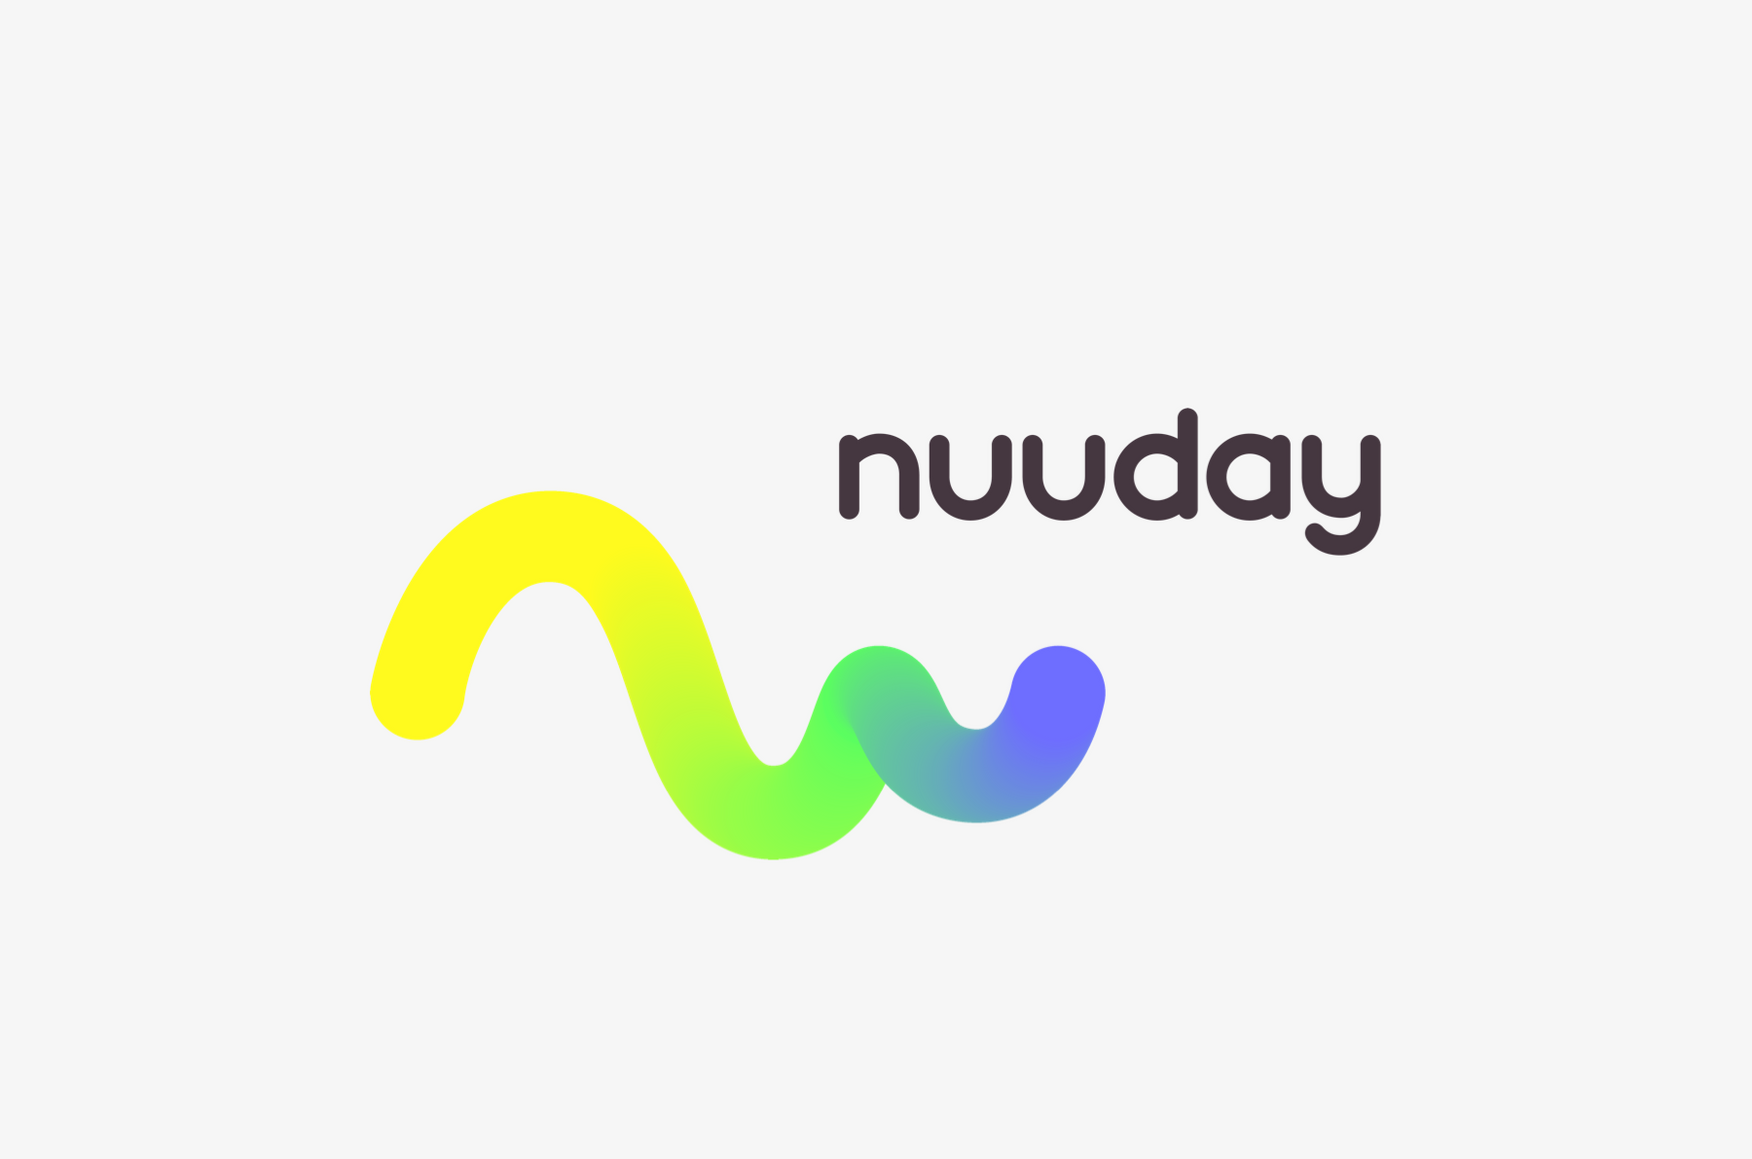 The Nuuday logo, the thick rounded line fading from yellow to blue, and "nuuday" written in black Nuuday font.